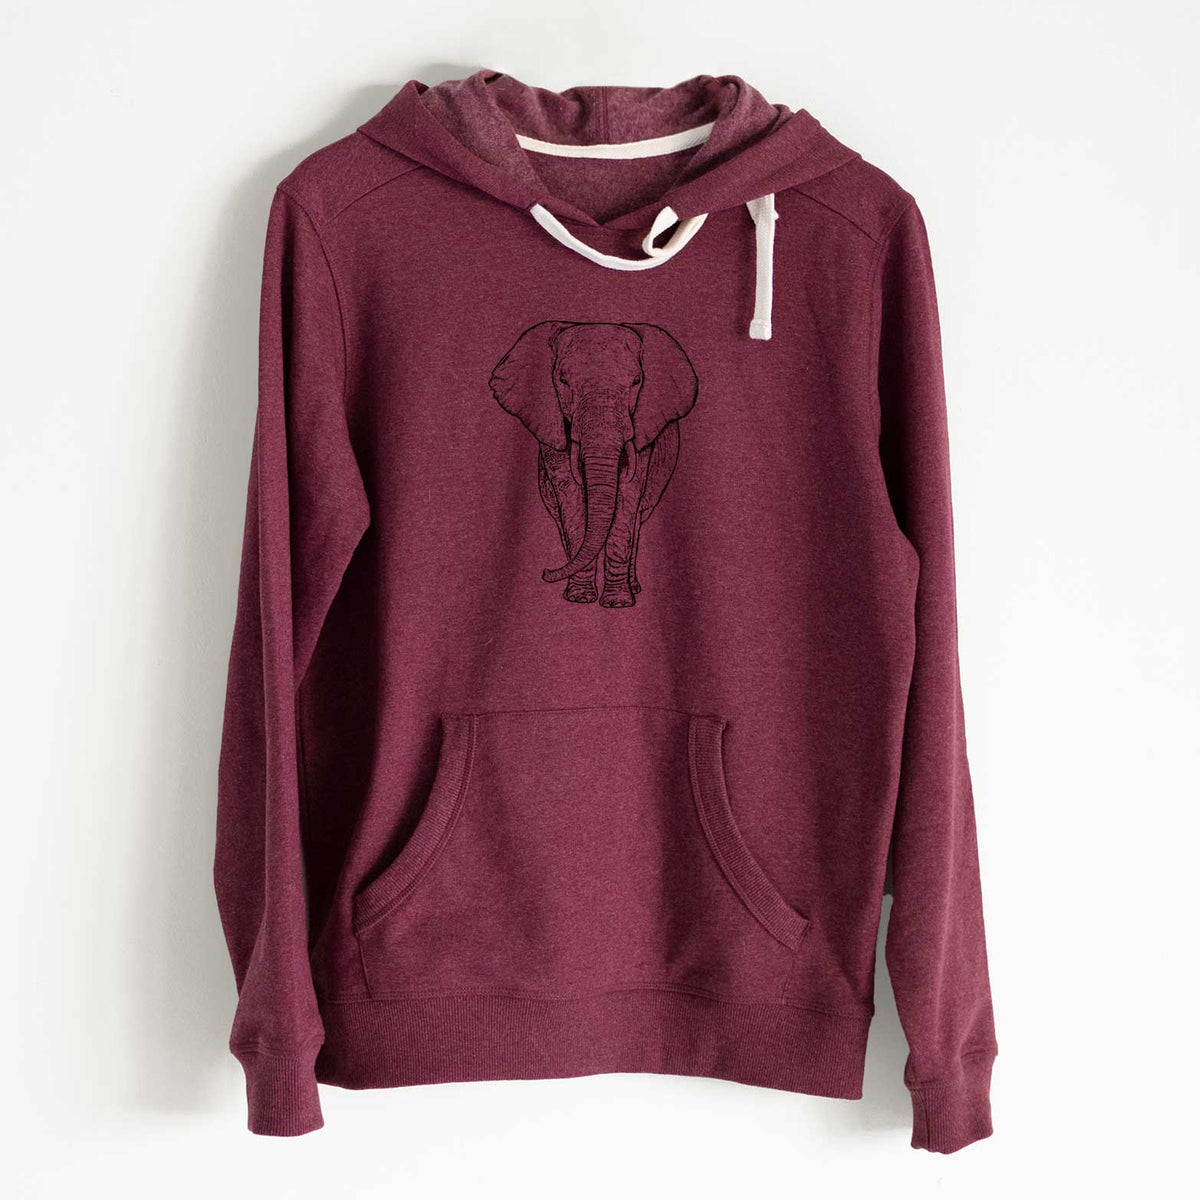 Loxodonta africana - African Elephant - Unisex Recycled Hoodie - CLOSEOUT - FINAL SALE